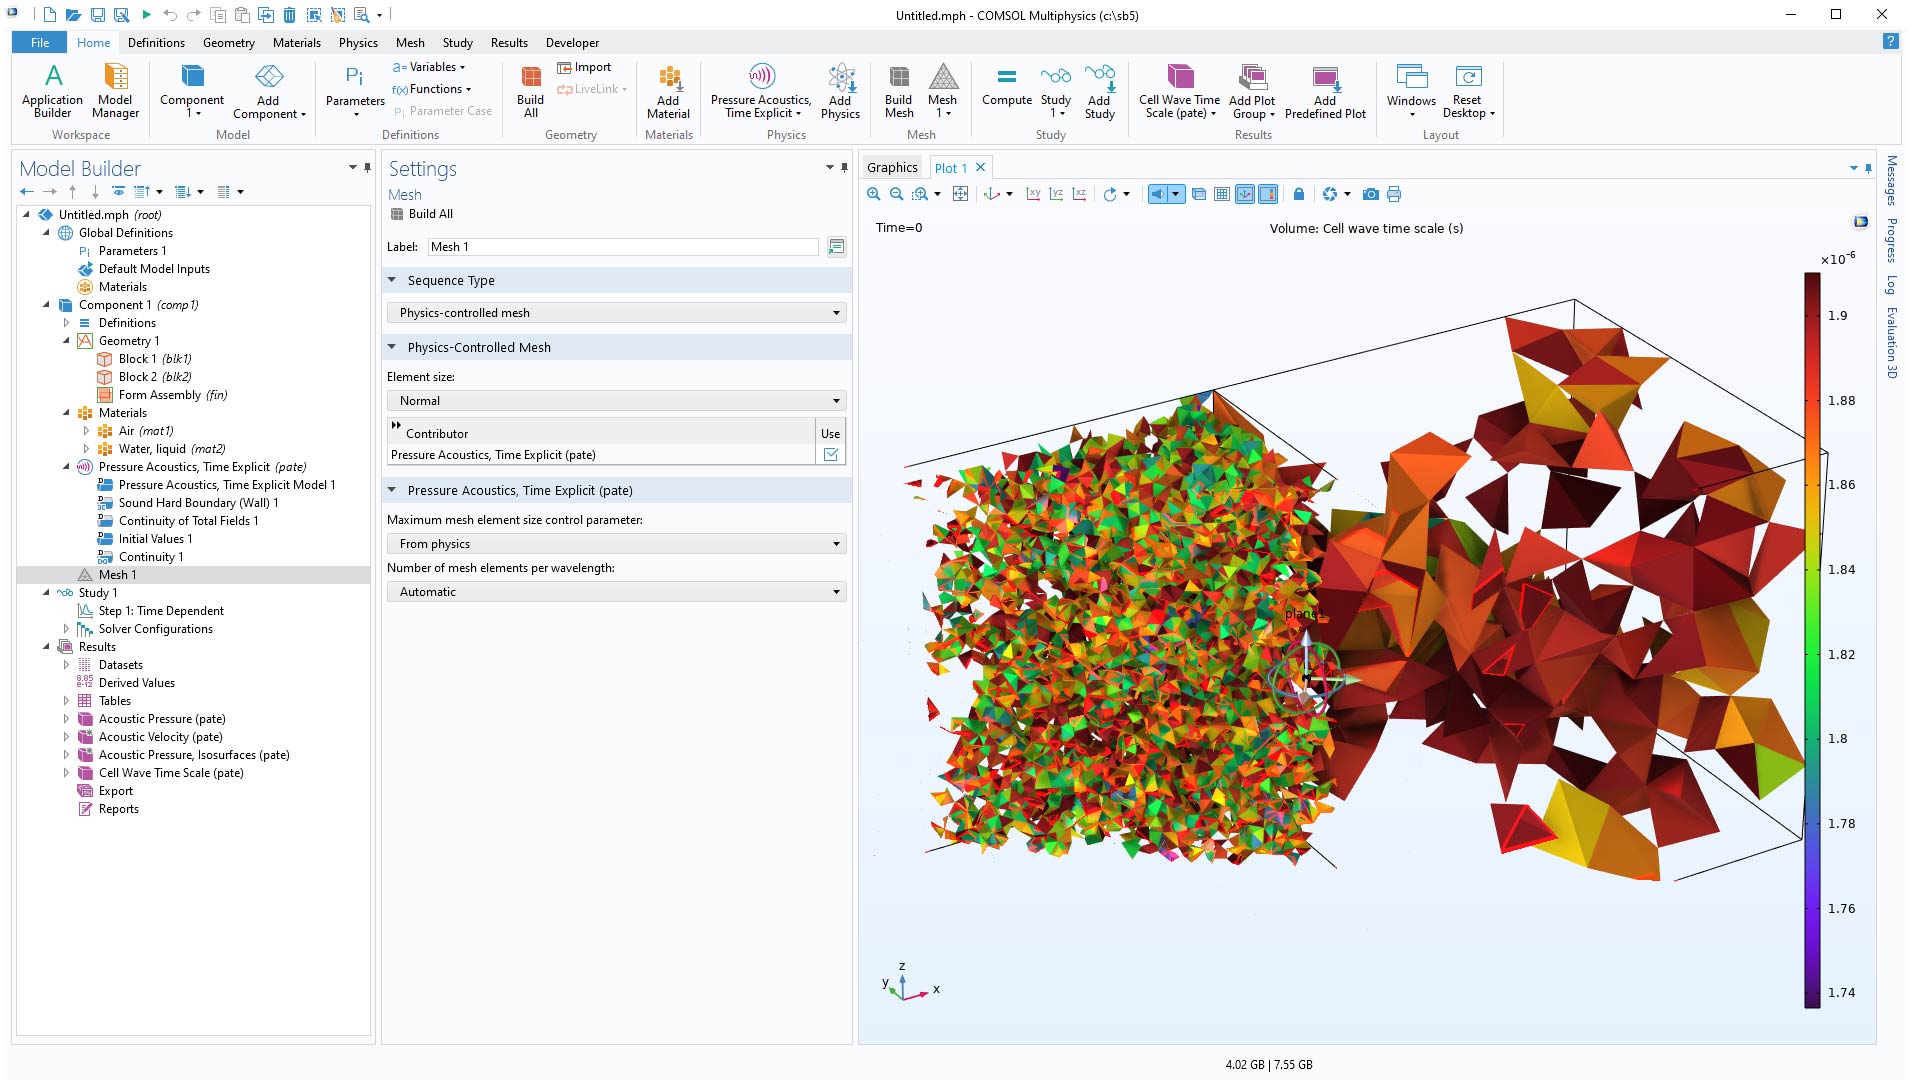 The COMSOL Multiphysics UI showing the Model Builder with the Mesh node highlighted, the corresponding Settings window, and a 3D plot in the Graphics window.